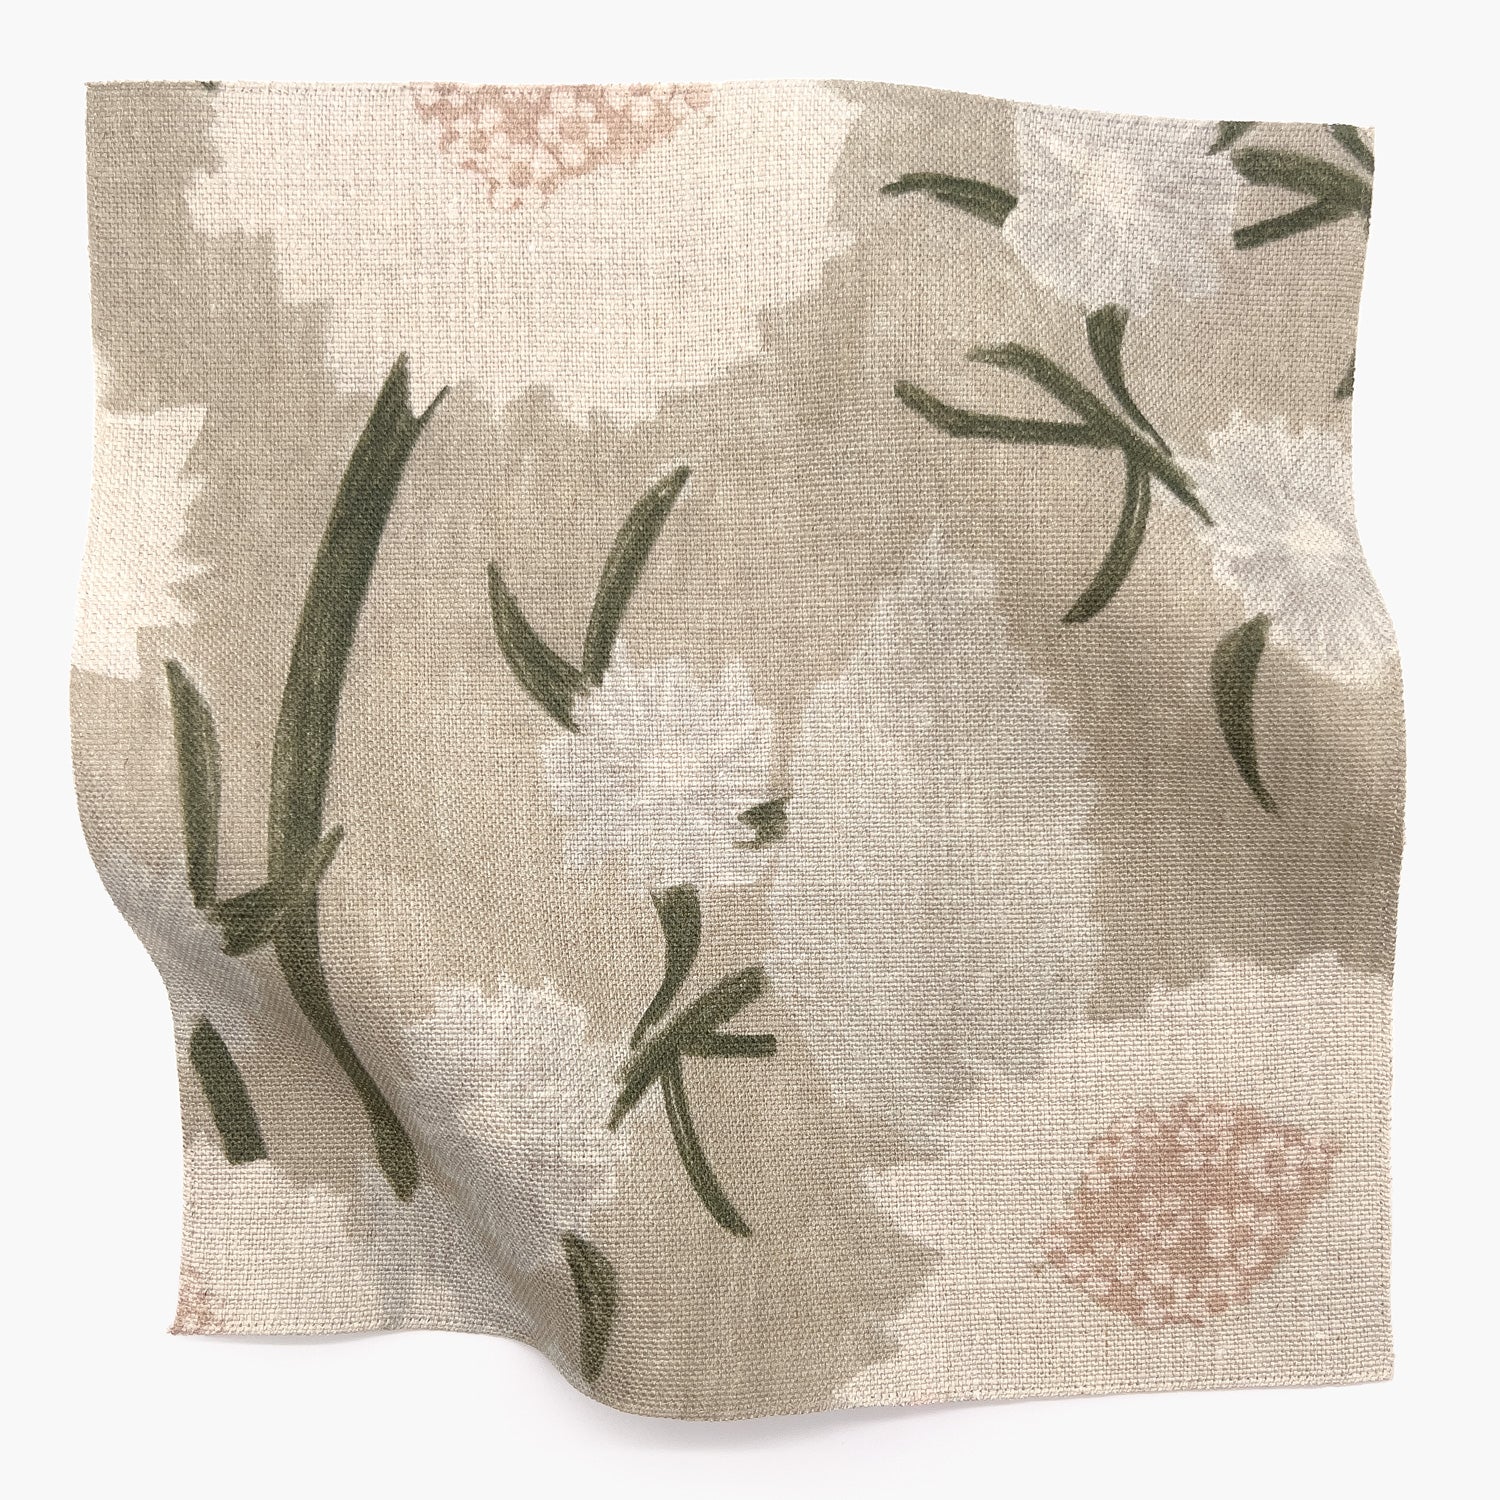 Square fabric swatch in a playful floral print in shades of white, olive and gray on a cream field.